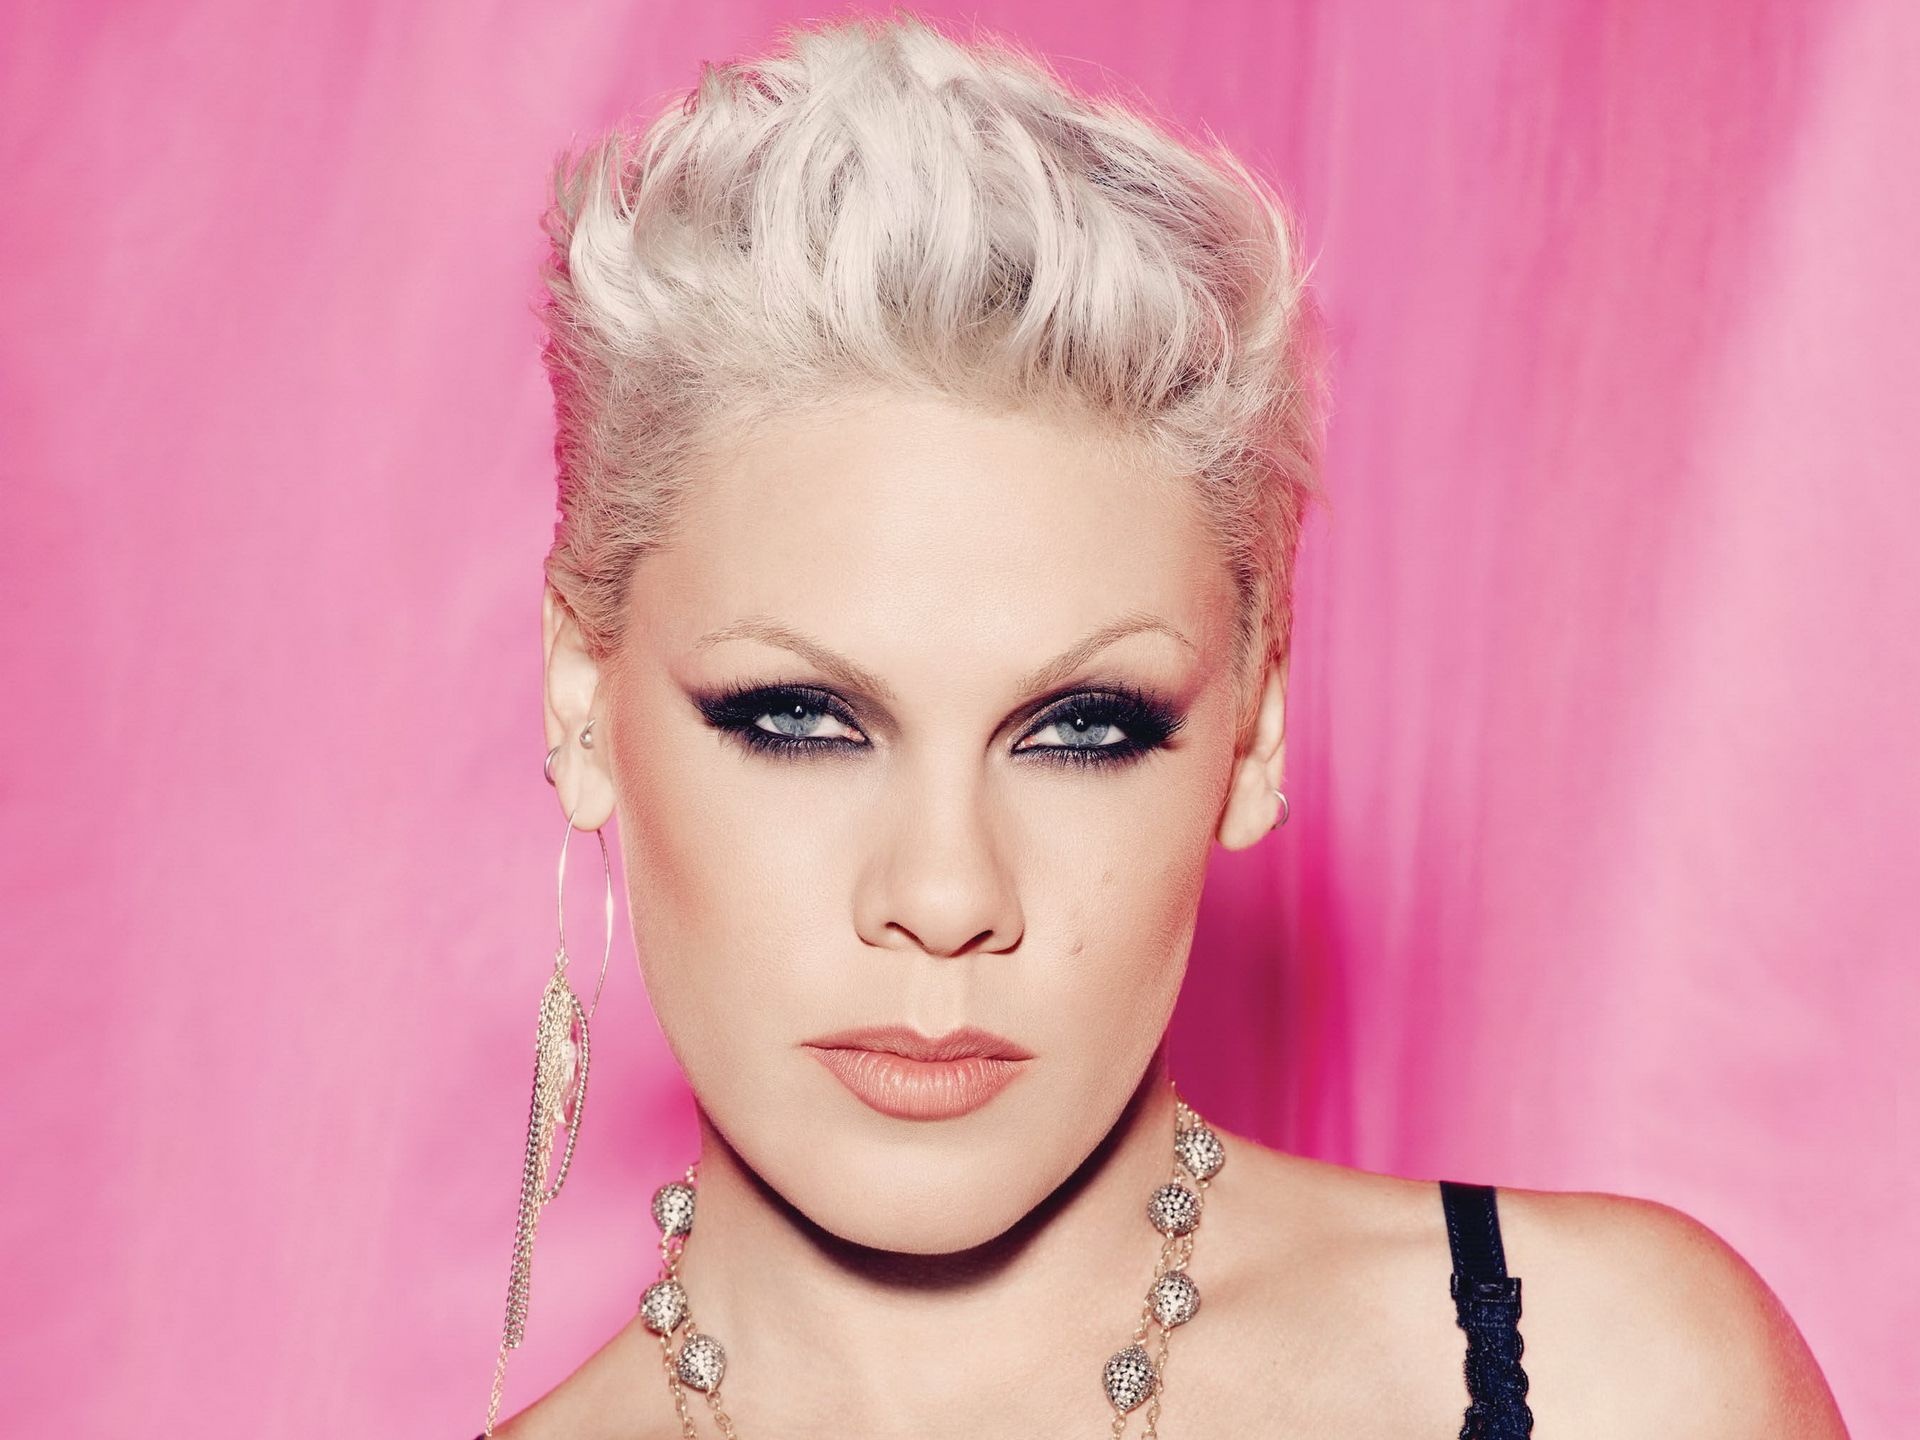 Pink Singer Wallpapers - Top Free Pink Singer Backgrounds 1920x1440